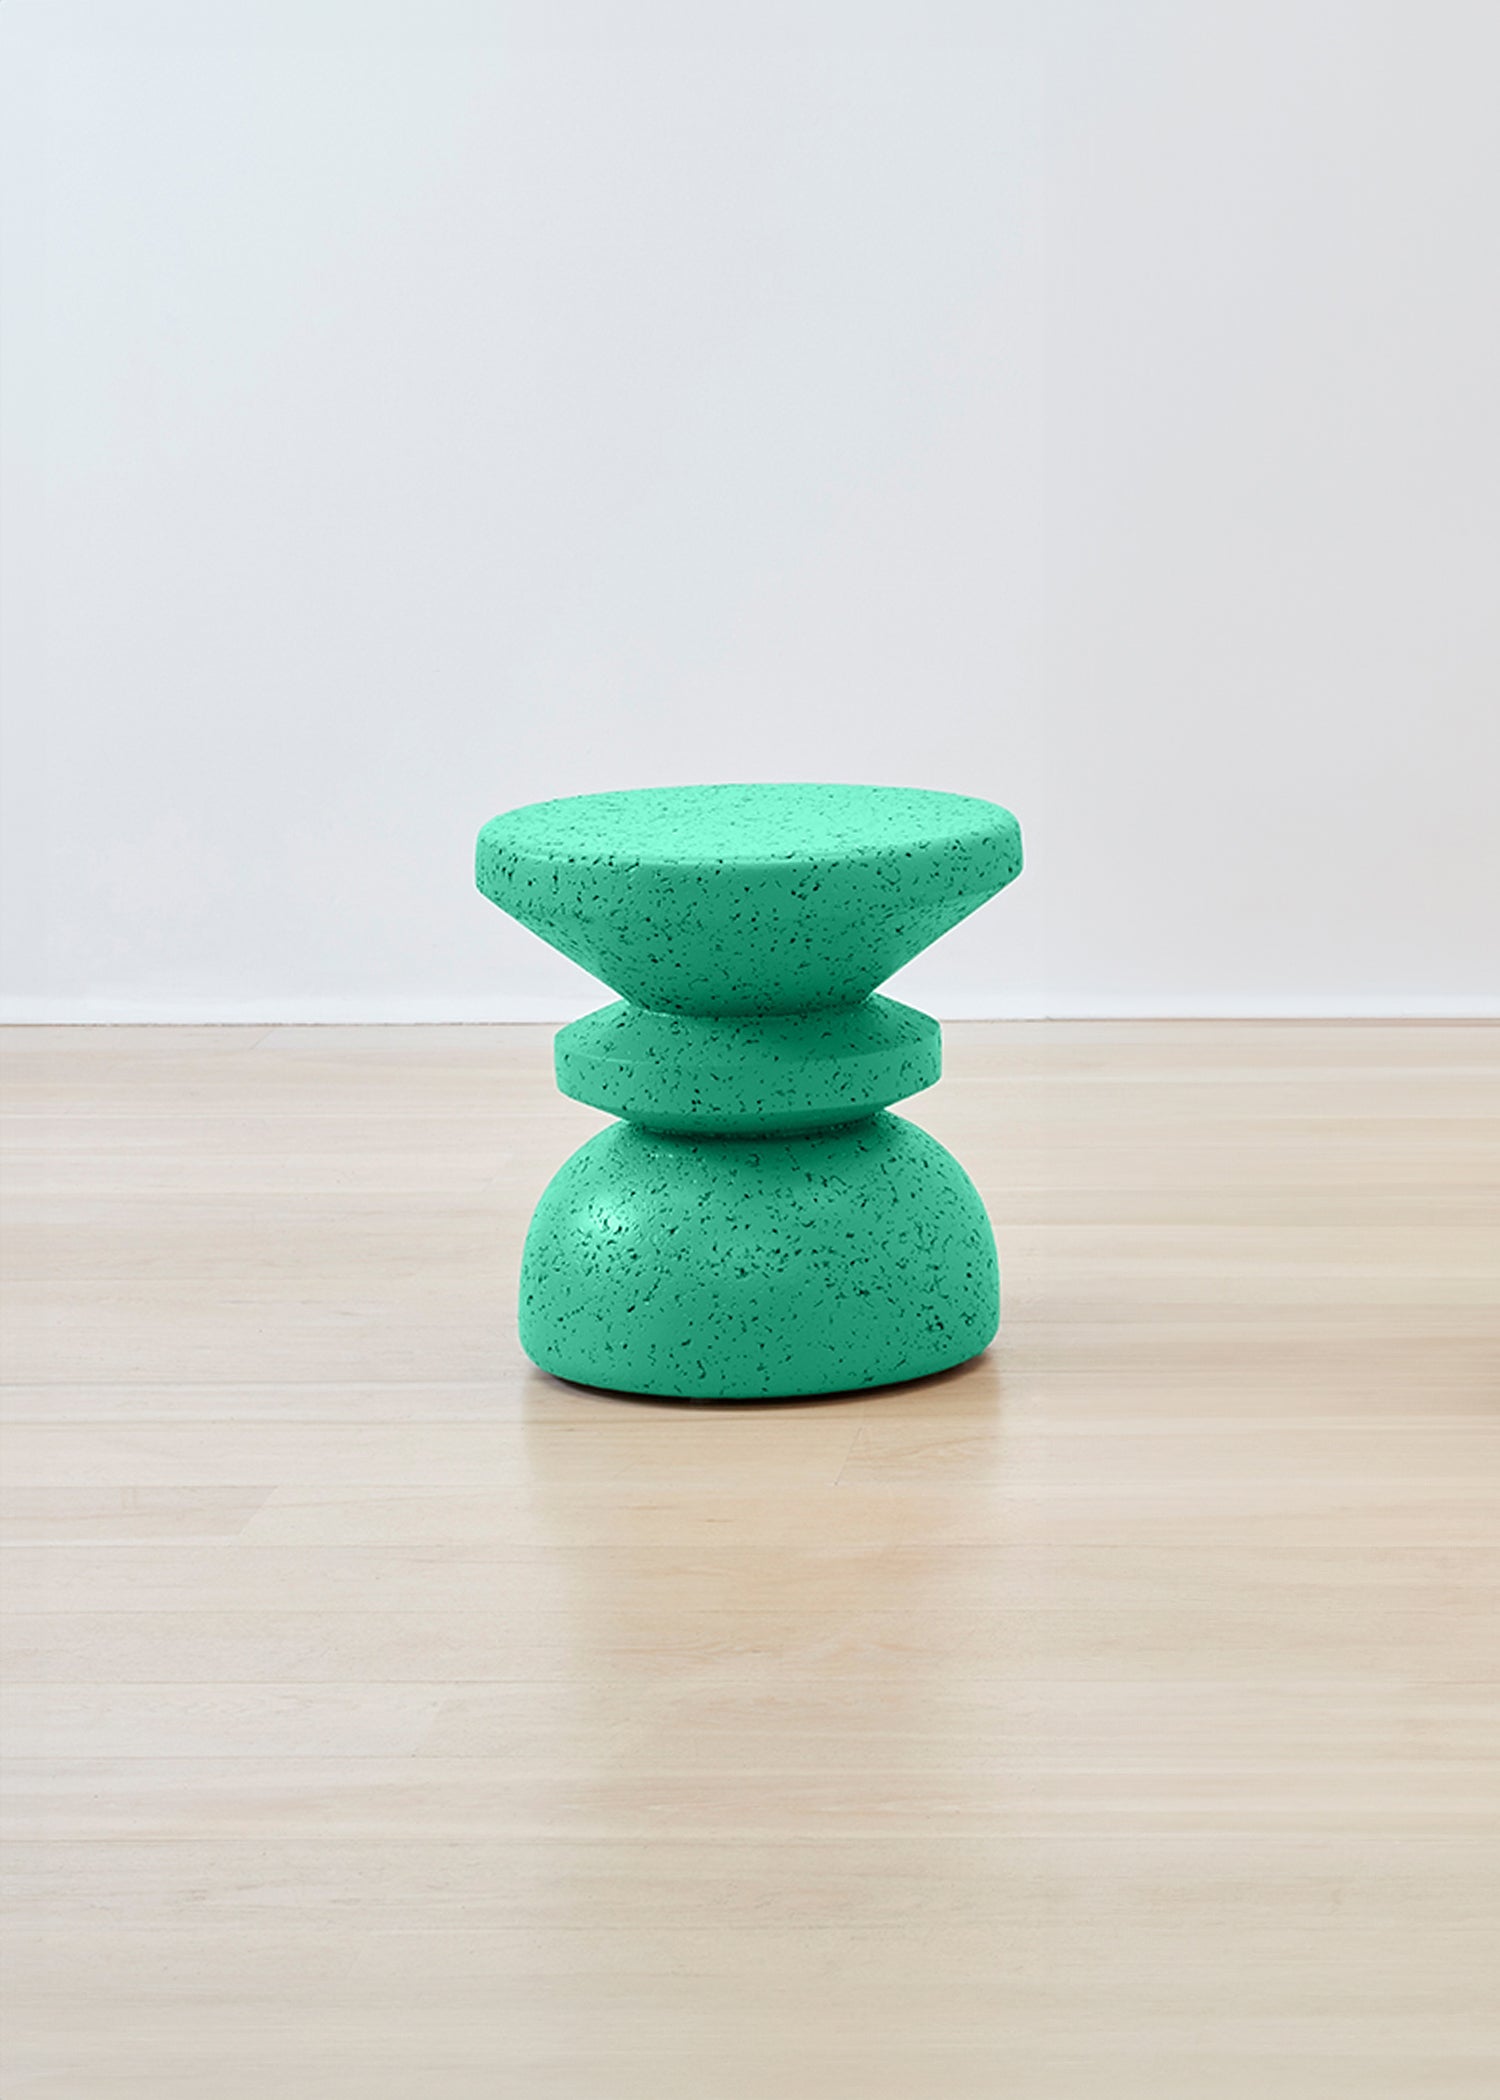 Striking Kanju Wiid African Stacked Cork Stool painted in a serene teal, blending innovative design with eco-sustainability. This visually appealing stool layers cork for a textured, contemporary look, ideal for adding a splash of color and artisanal charm to modern spaces.